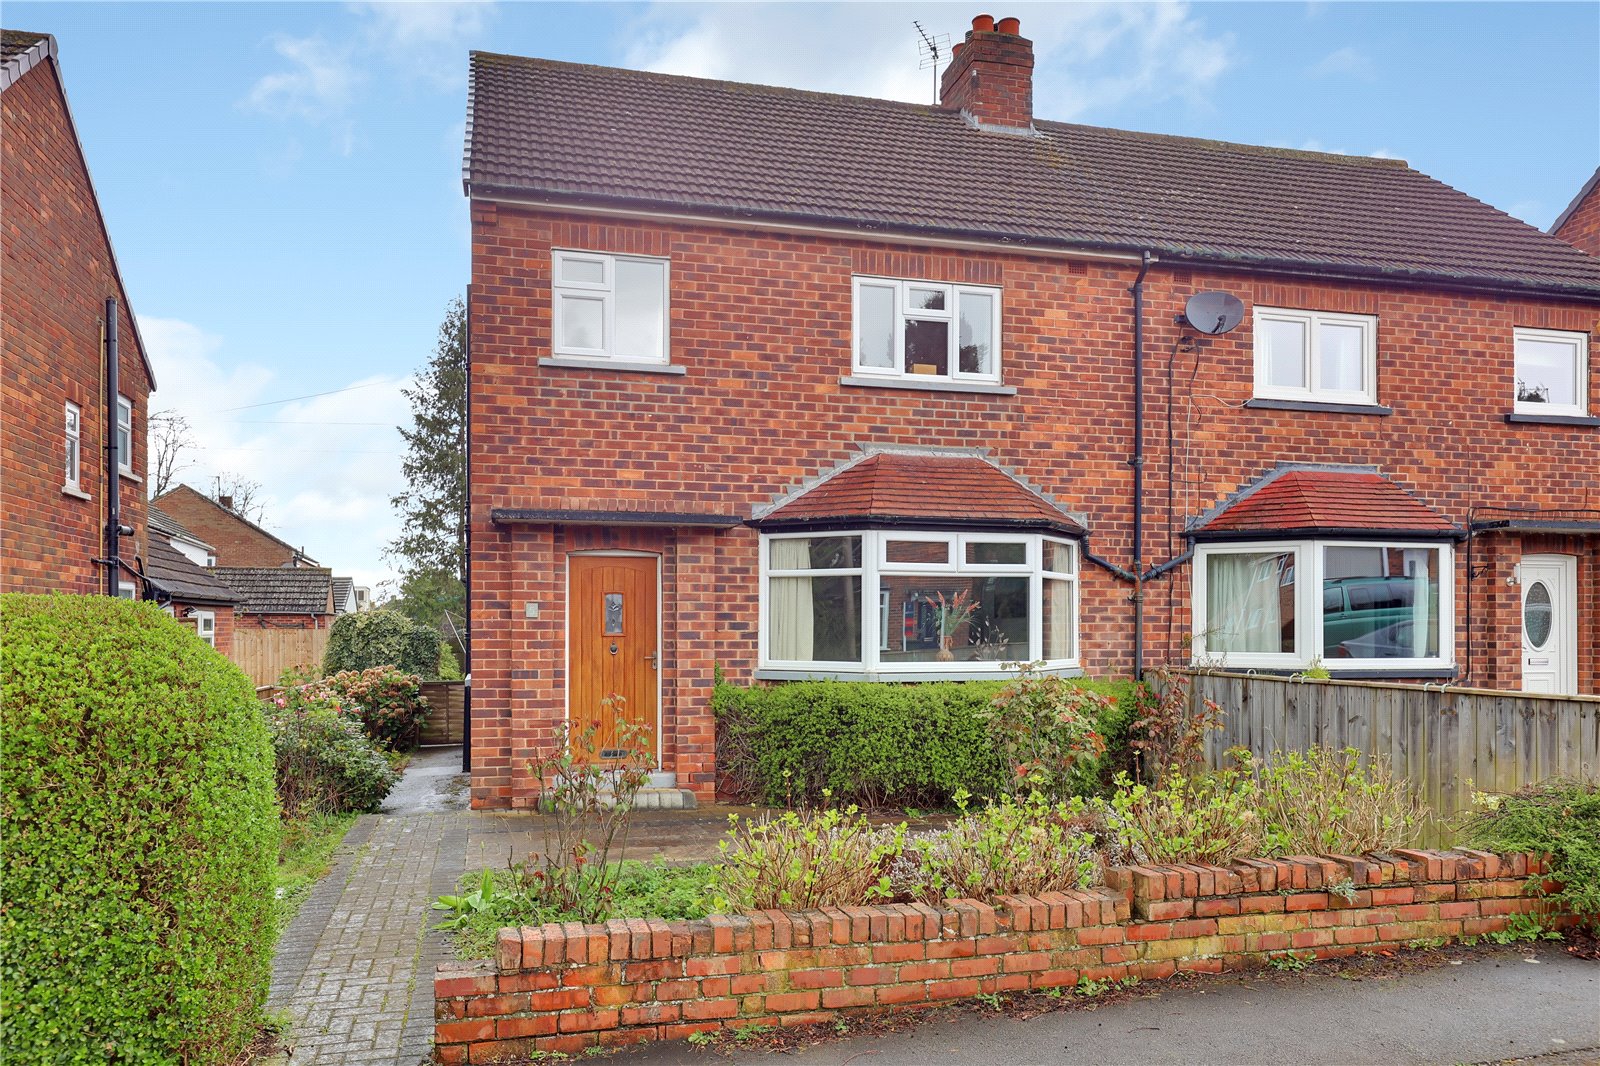 3 bed house for sale in Clarence Road, Nunthorpe - Property Image 1